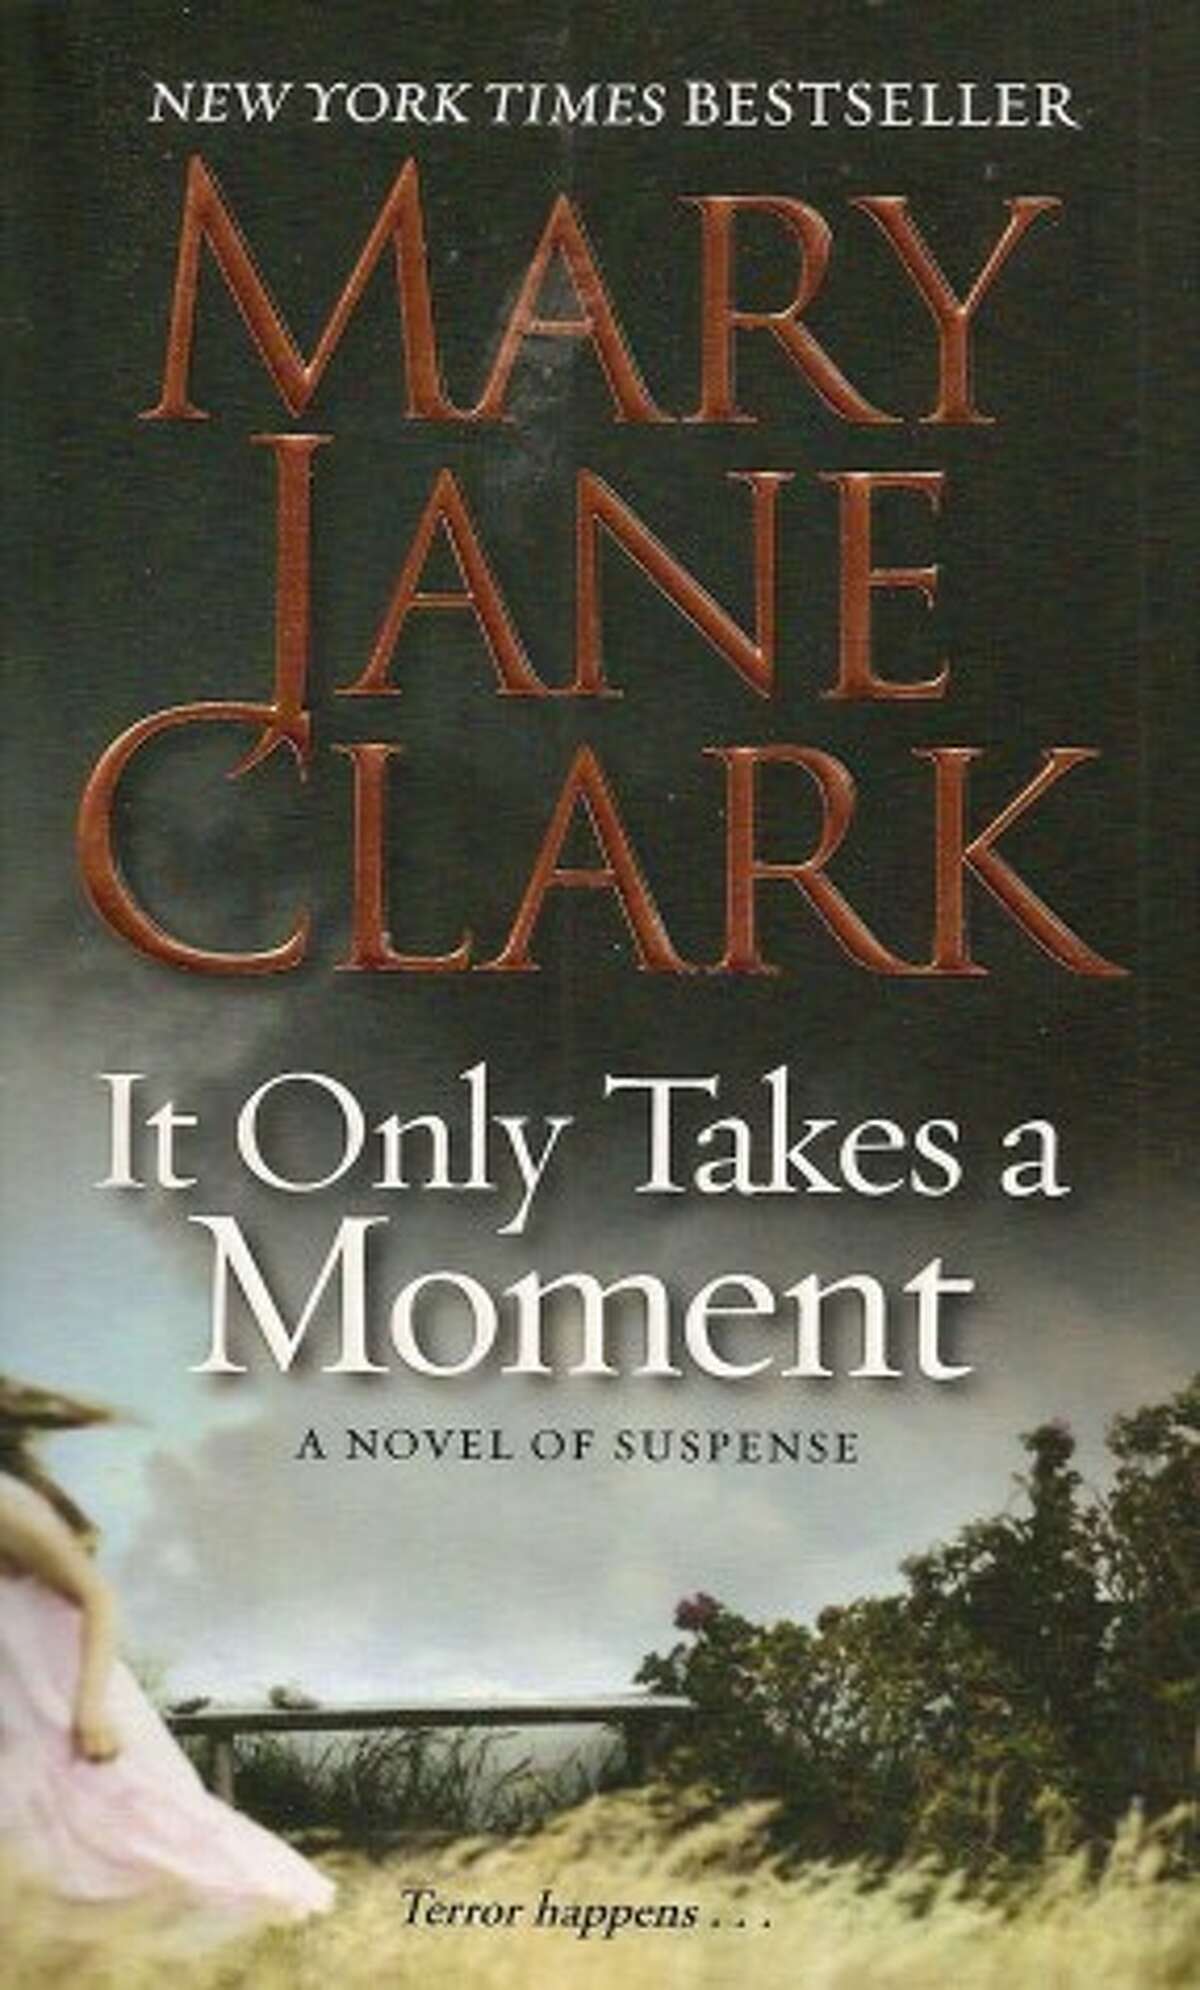 ‘It Only Takes a Moment’ holds its suspense throughout